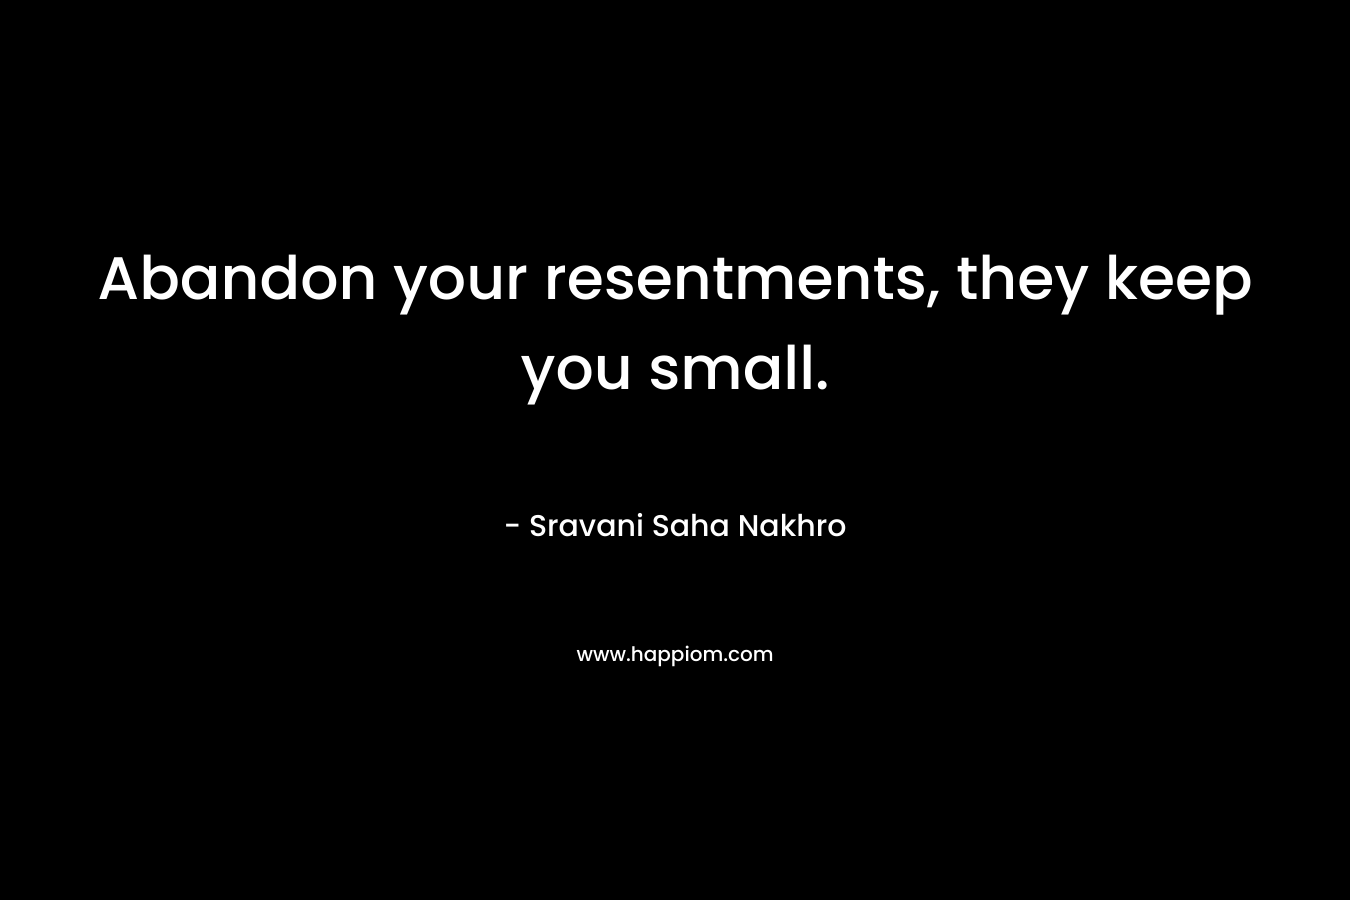 Abandon your resentments, they keep you small.